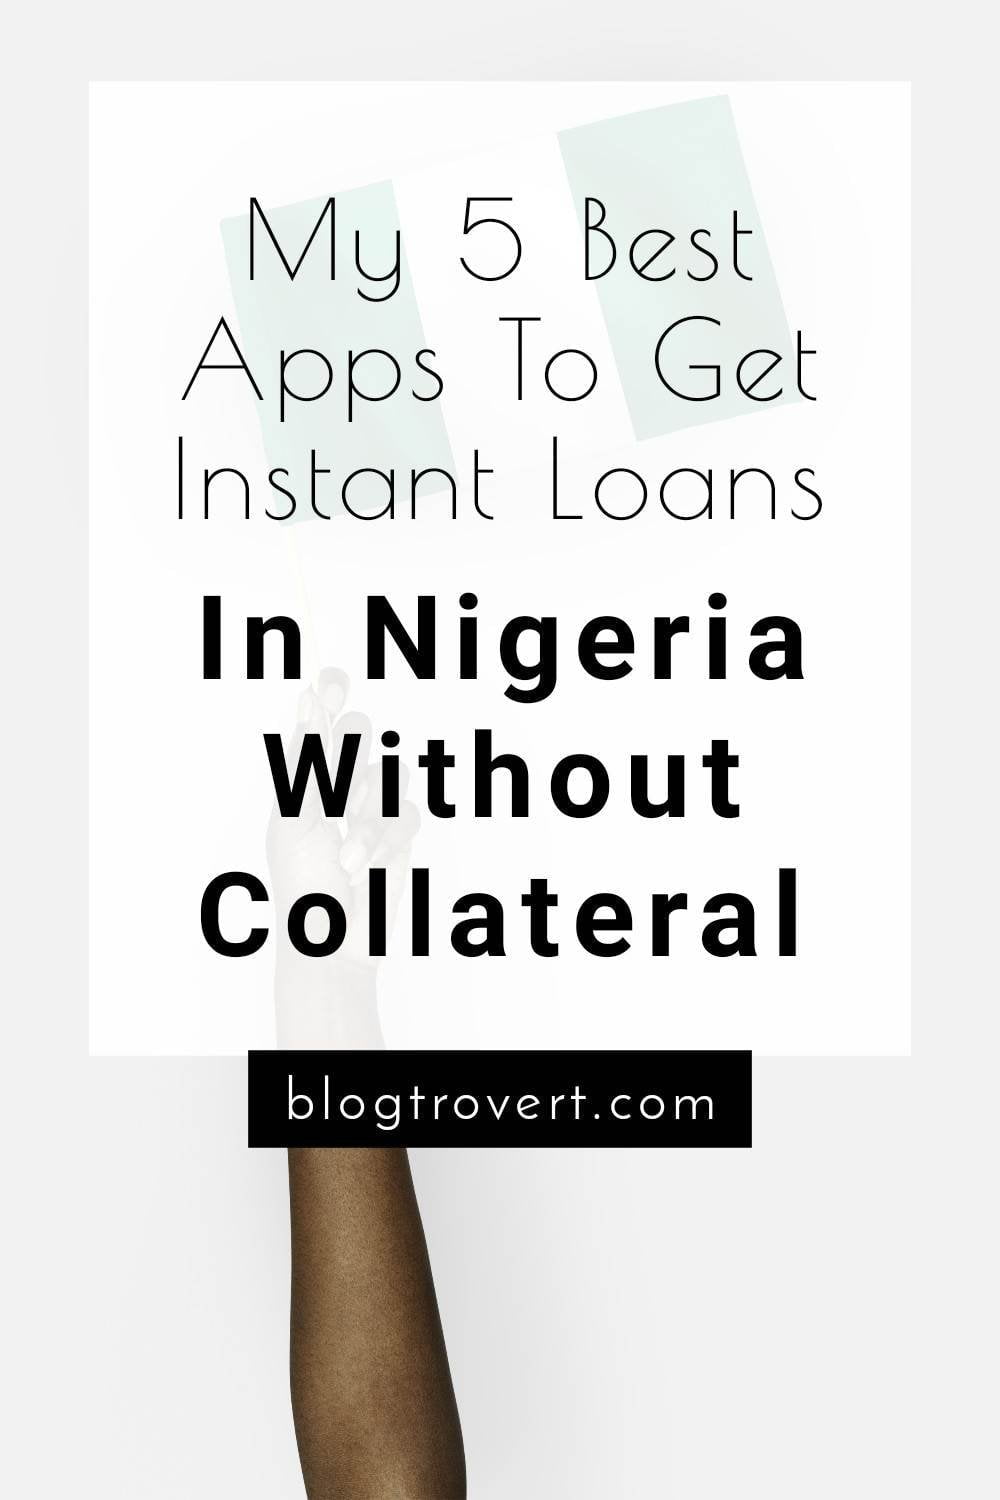 6 Top Loan Apps In Nigeria That Offer Low Interest Rates 1